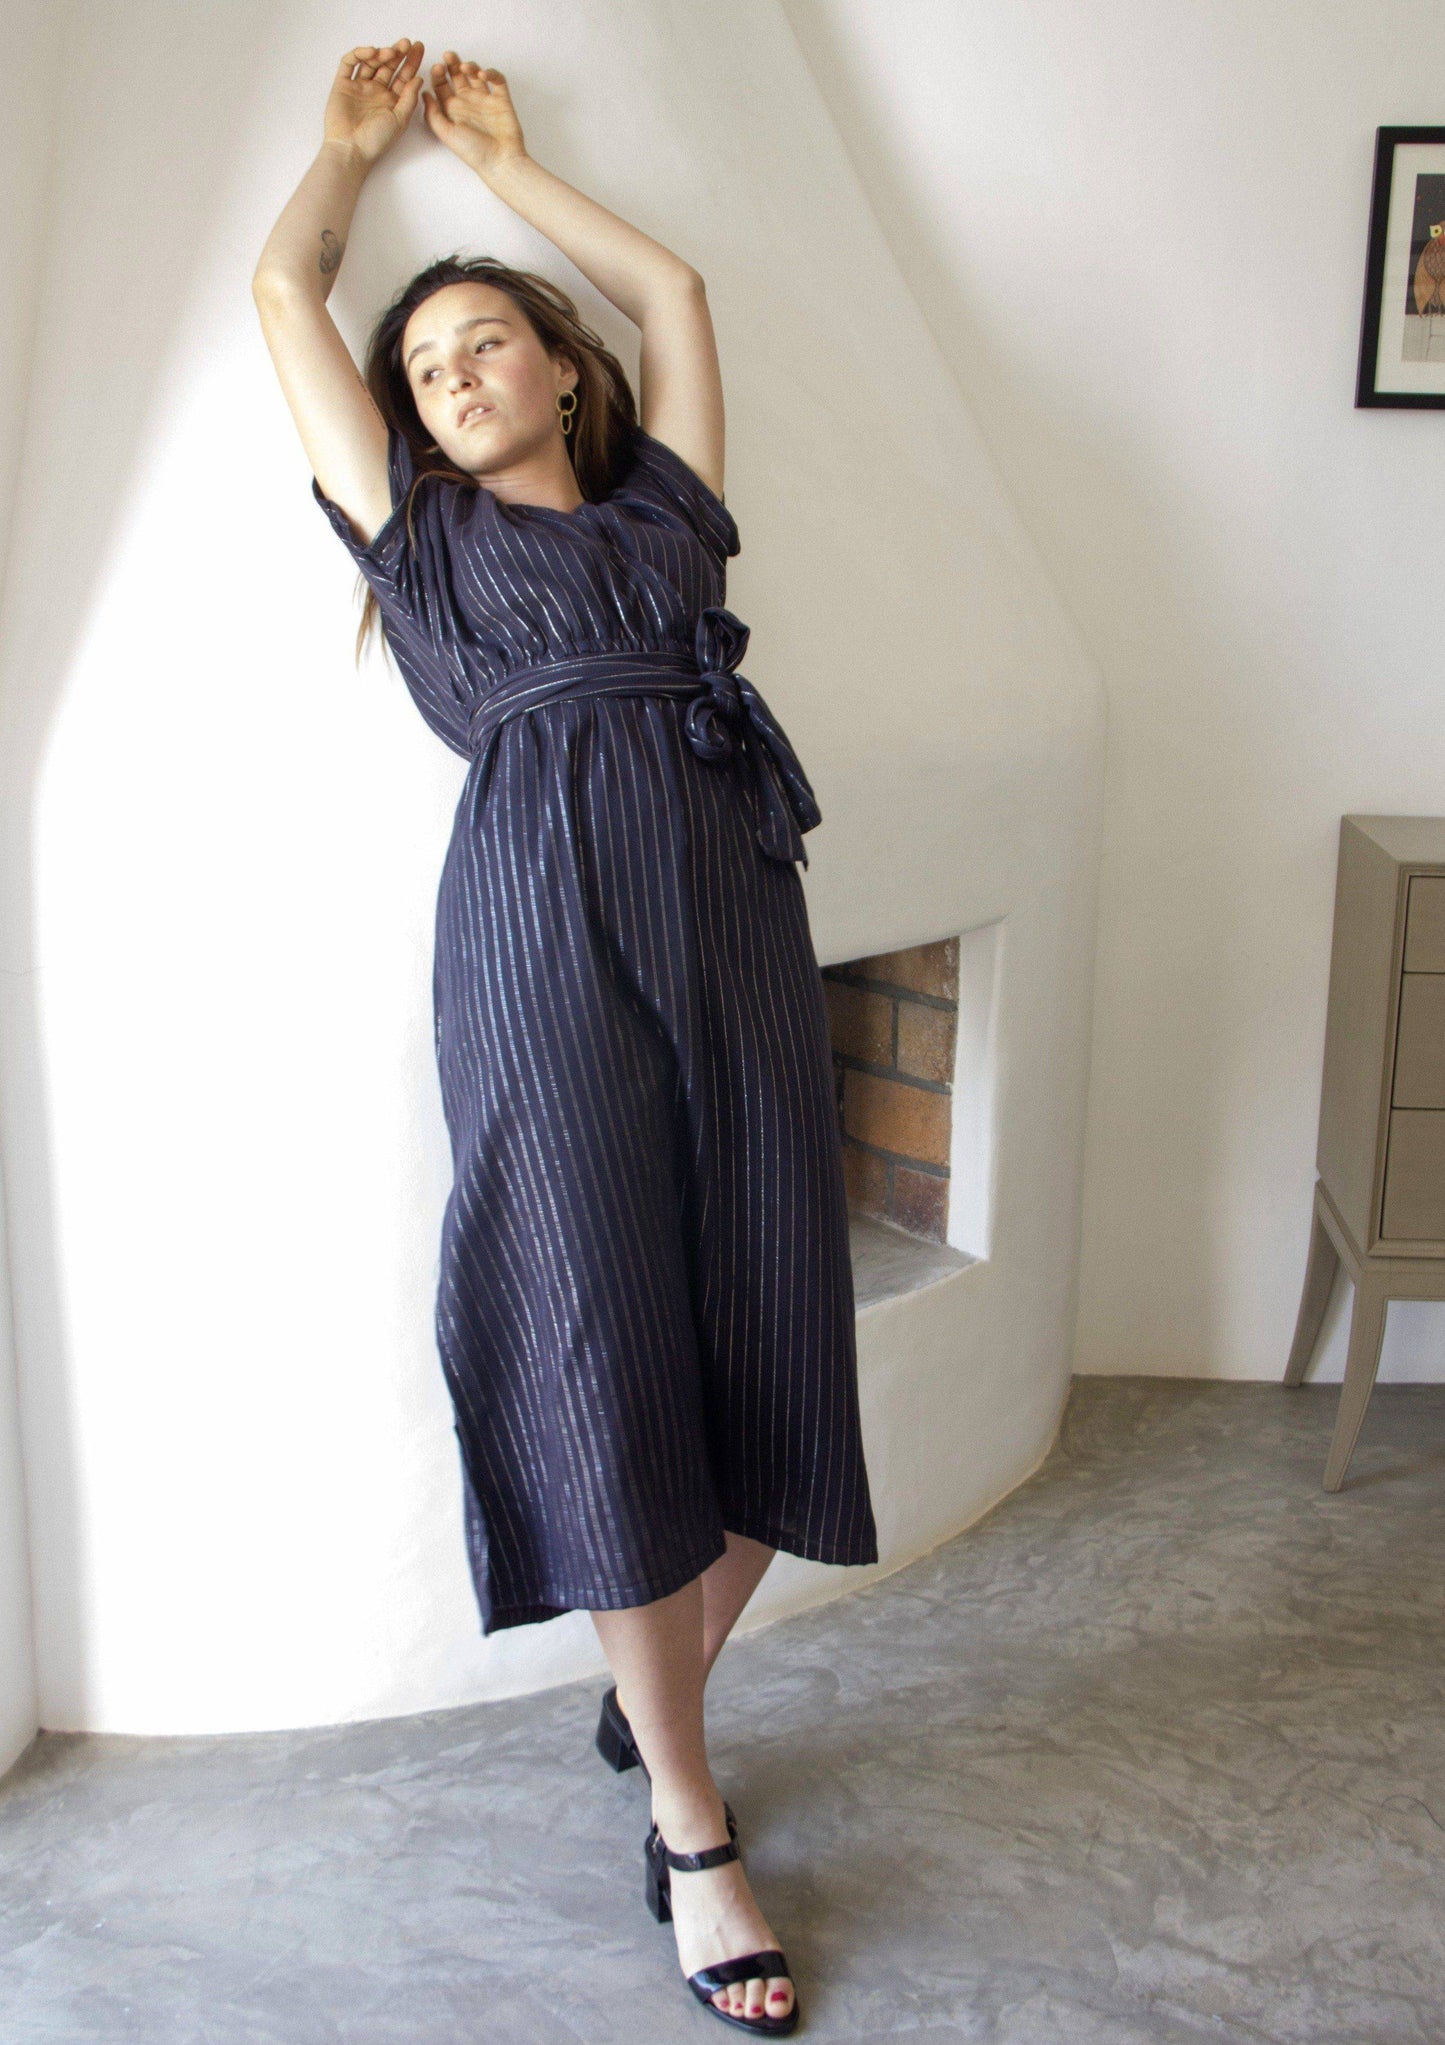 DELPHINE DRESS •  maxi dress gently cinched at the waist for a feminine fit featuring a wrap-around belt, open low v-neckline with wide short sleeves, and side slits in the skirt in a silver fleck pinstripe fabric. Available in one size.